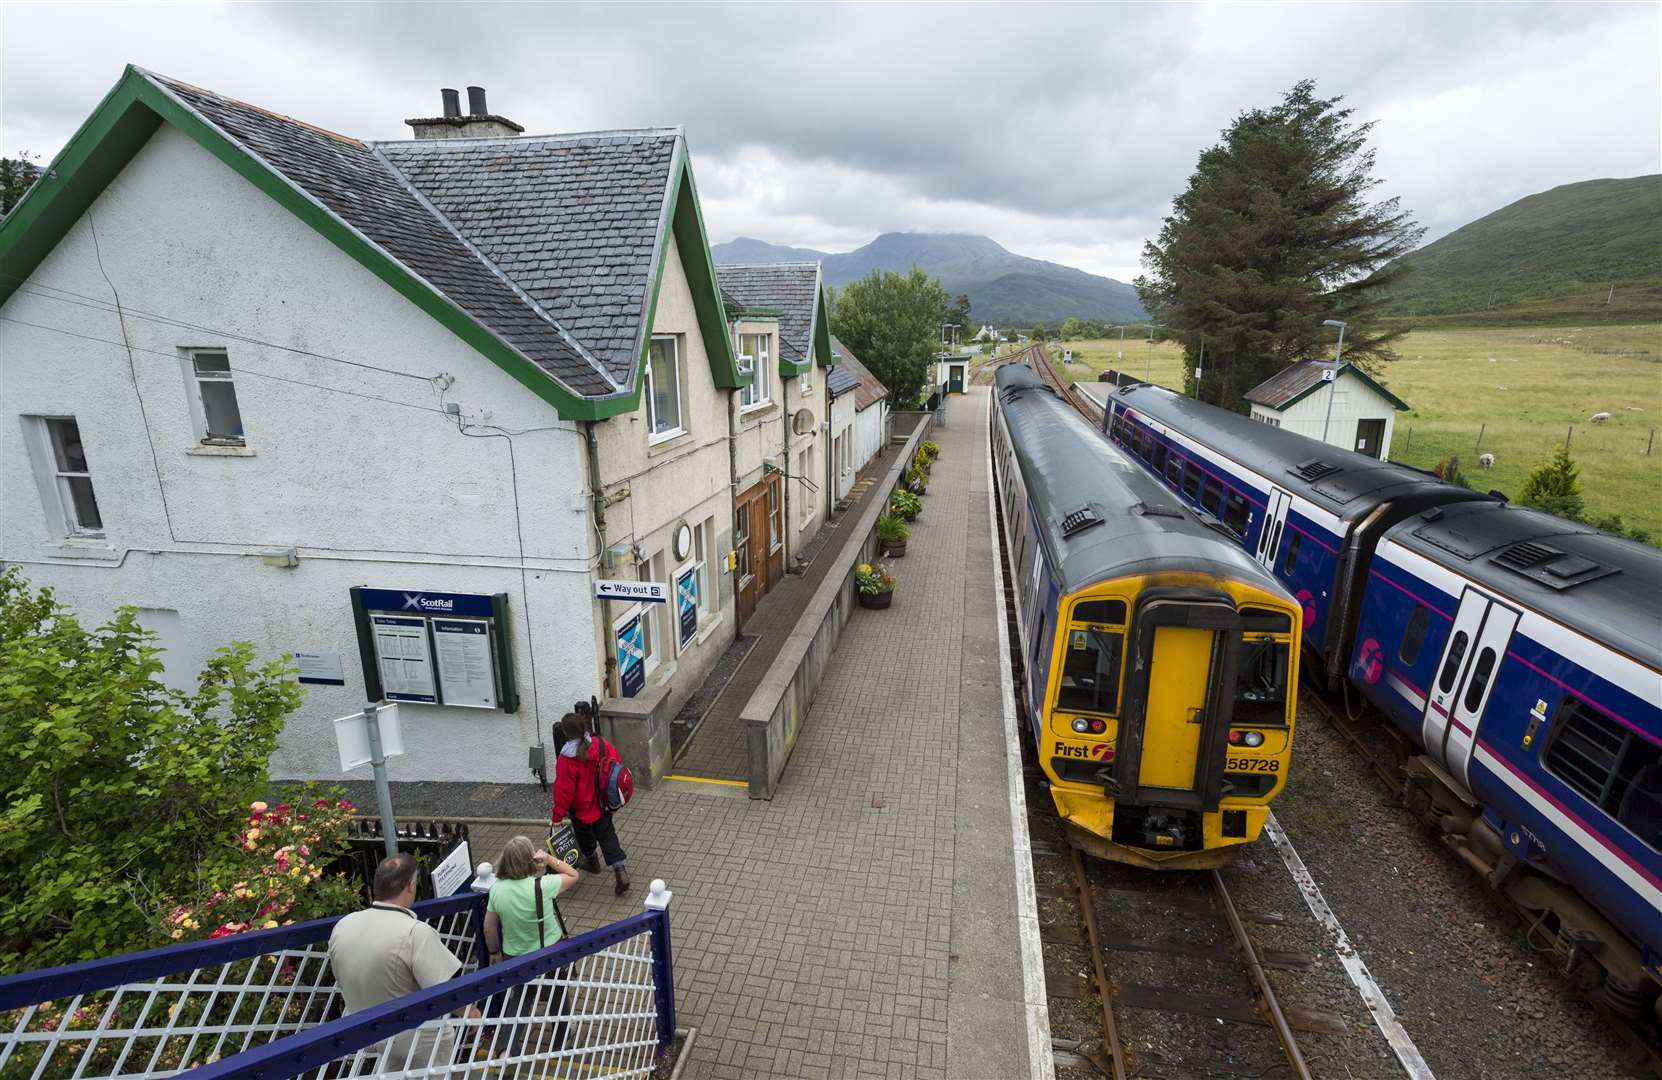 Trains at Strathcarron railway station on the West Highland Line.